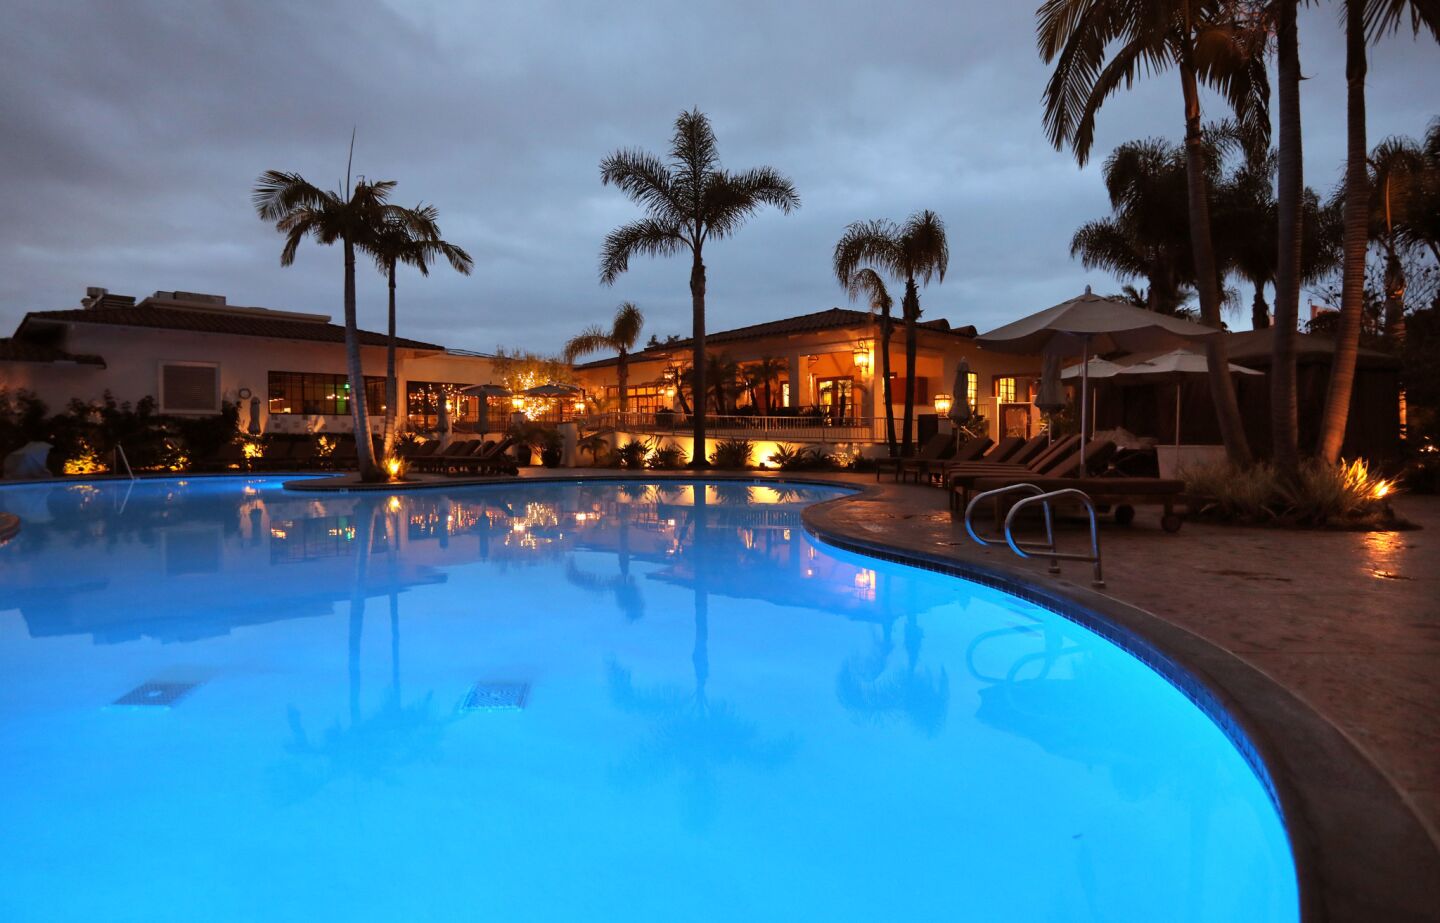 Dusk view of the pool at the Four Season Residence Club. Across the pool is the bar, restaurant and Driftwood spa.